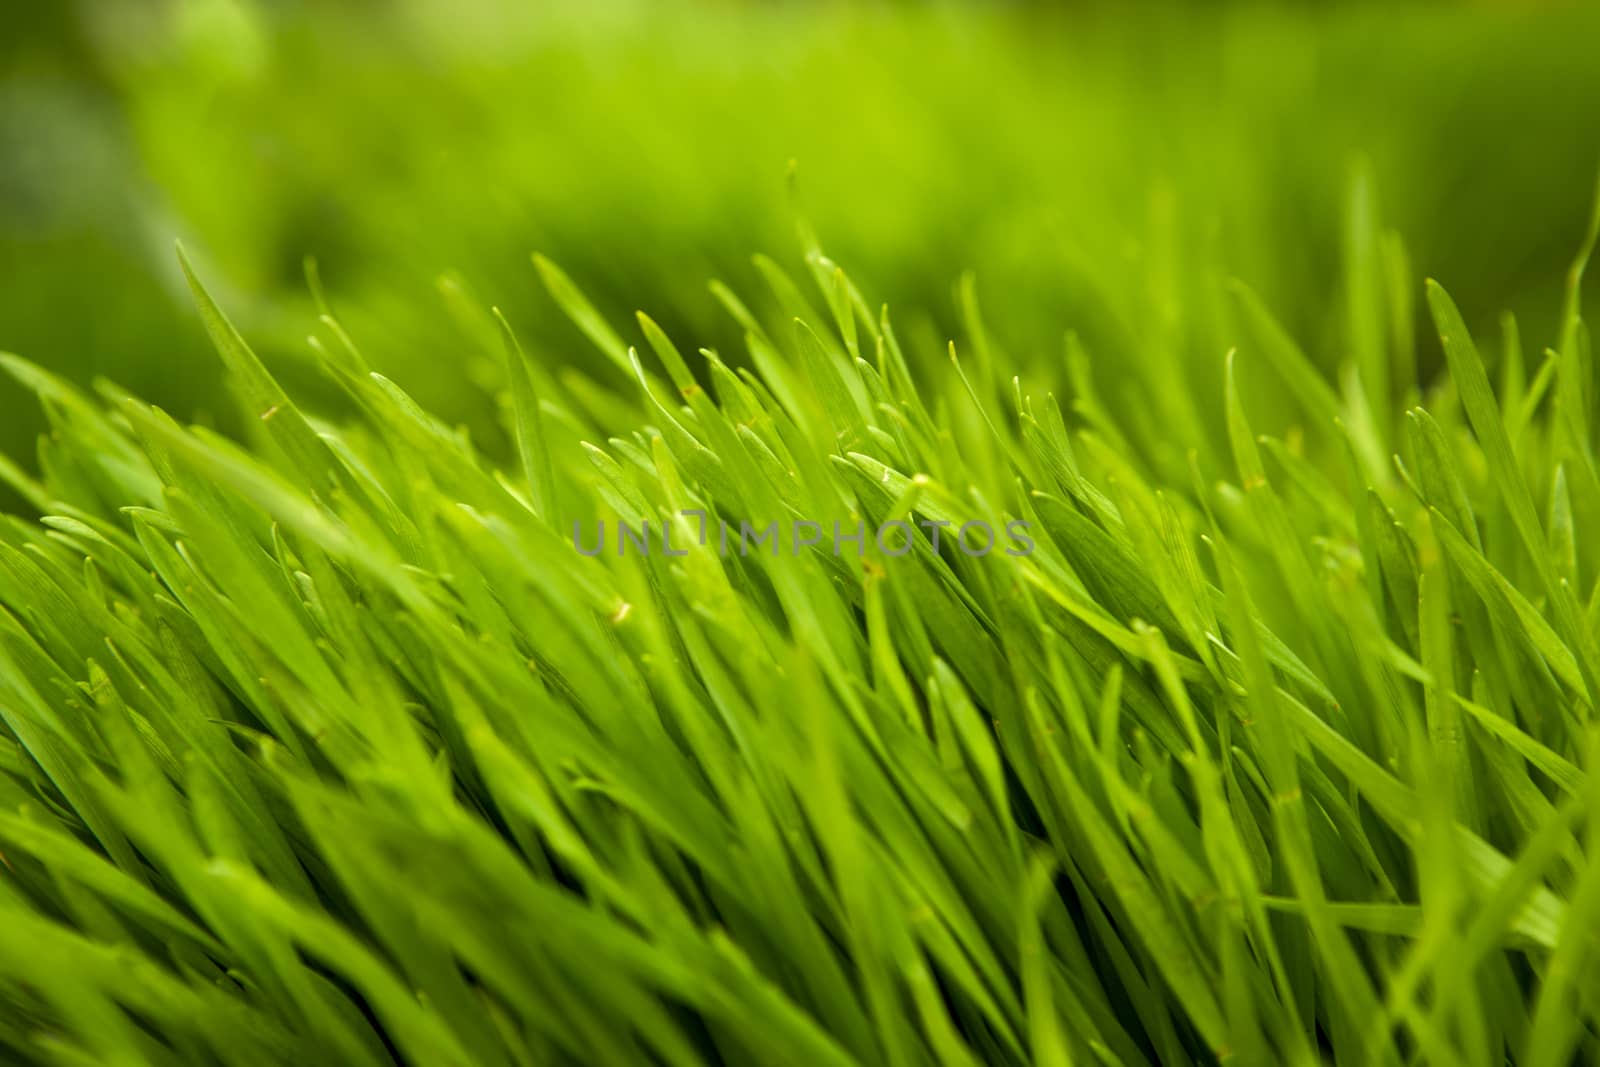 Close-up picture of fresh green grass